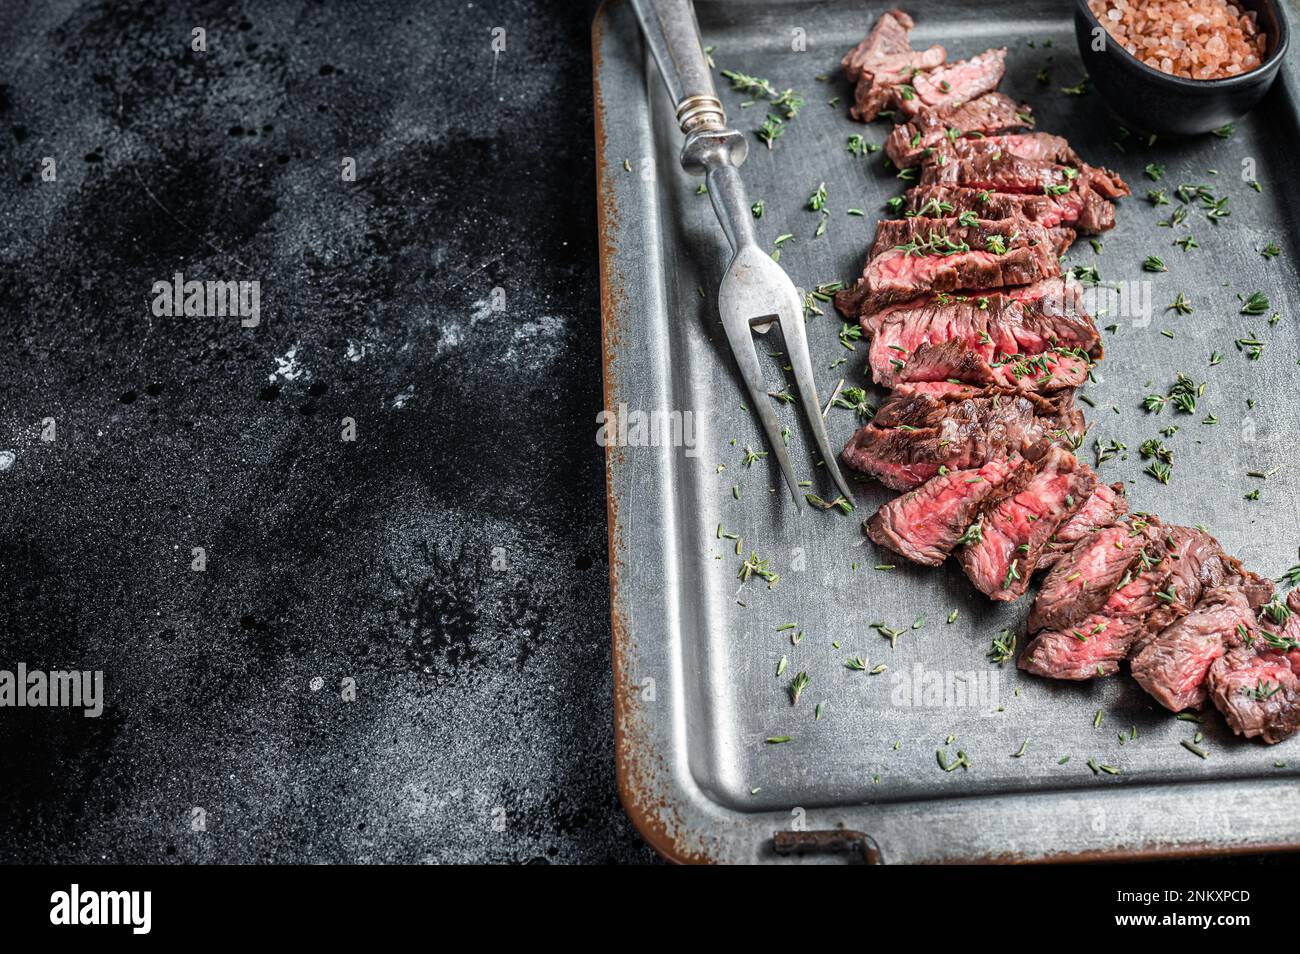 Grilled sliced Machete beef meat steak on steel tray with thyme. Black background. Top view. Copy space. Stock Photo